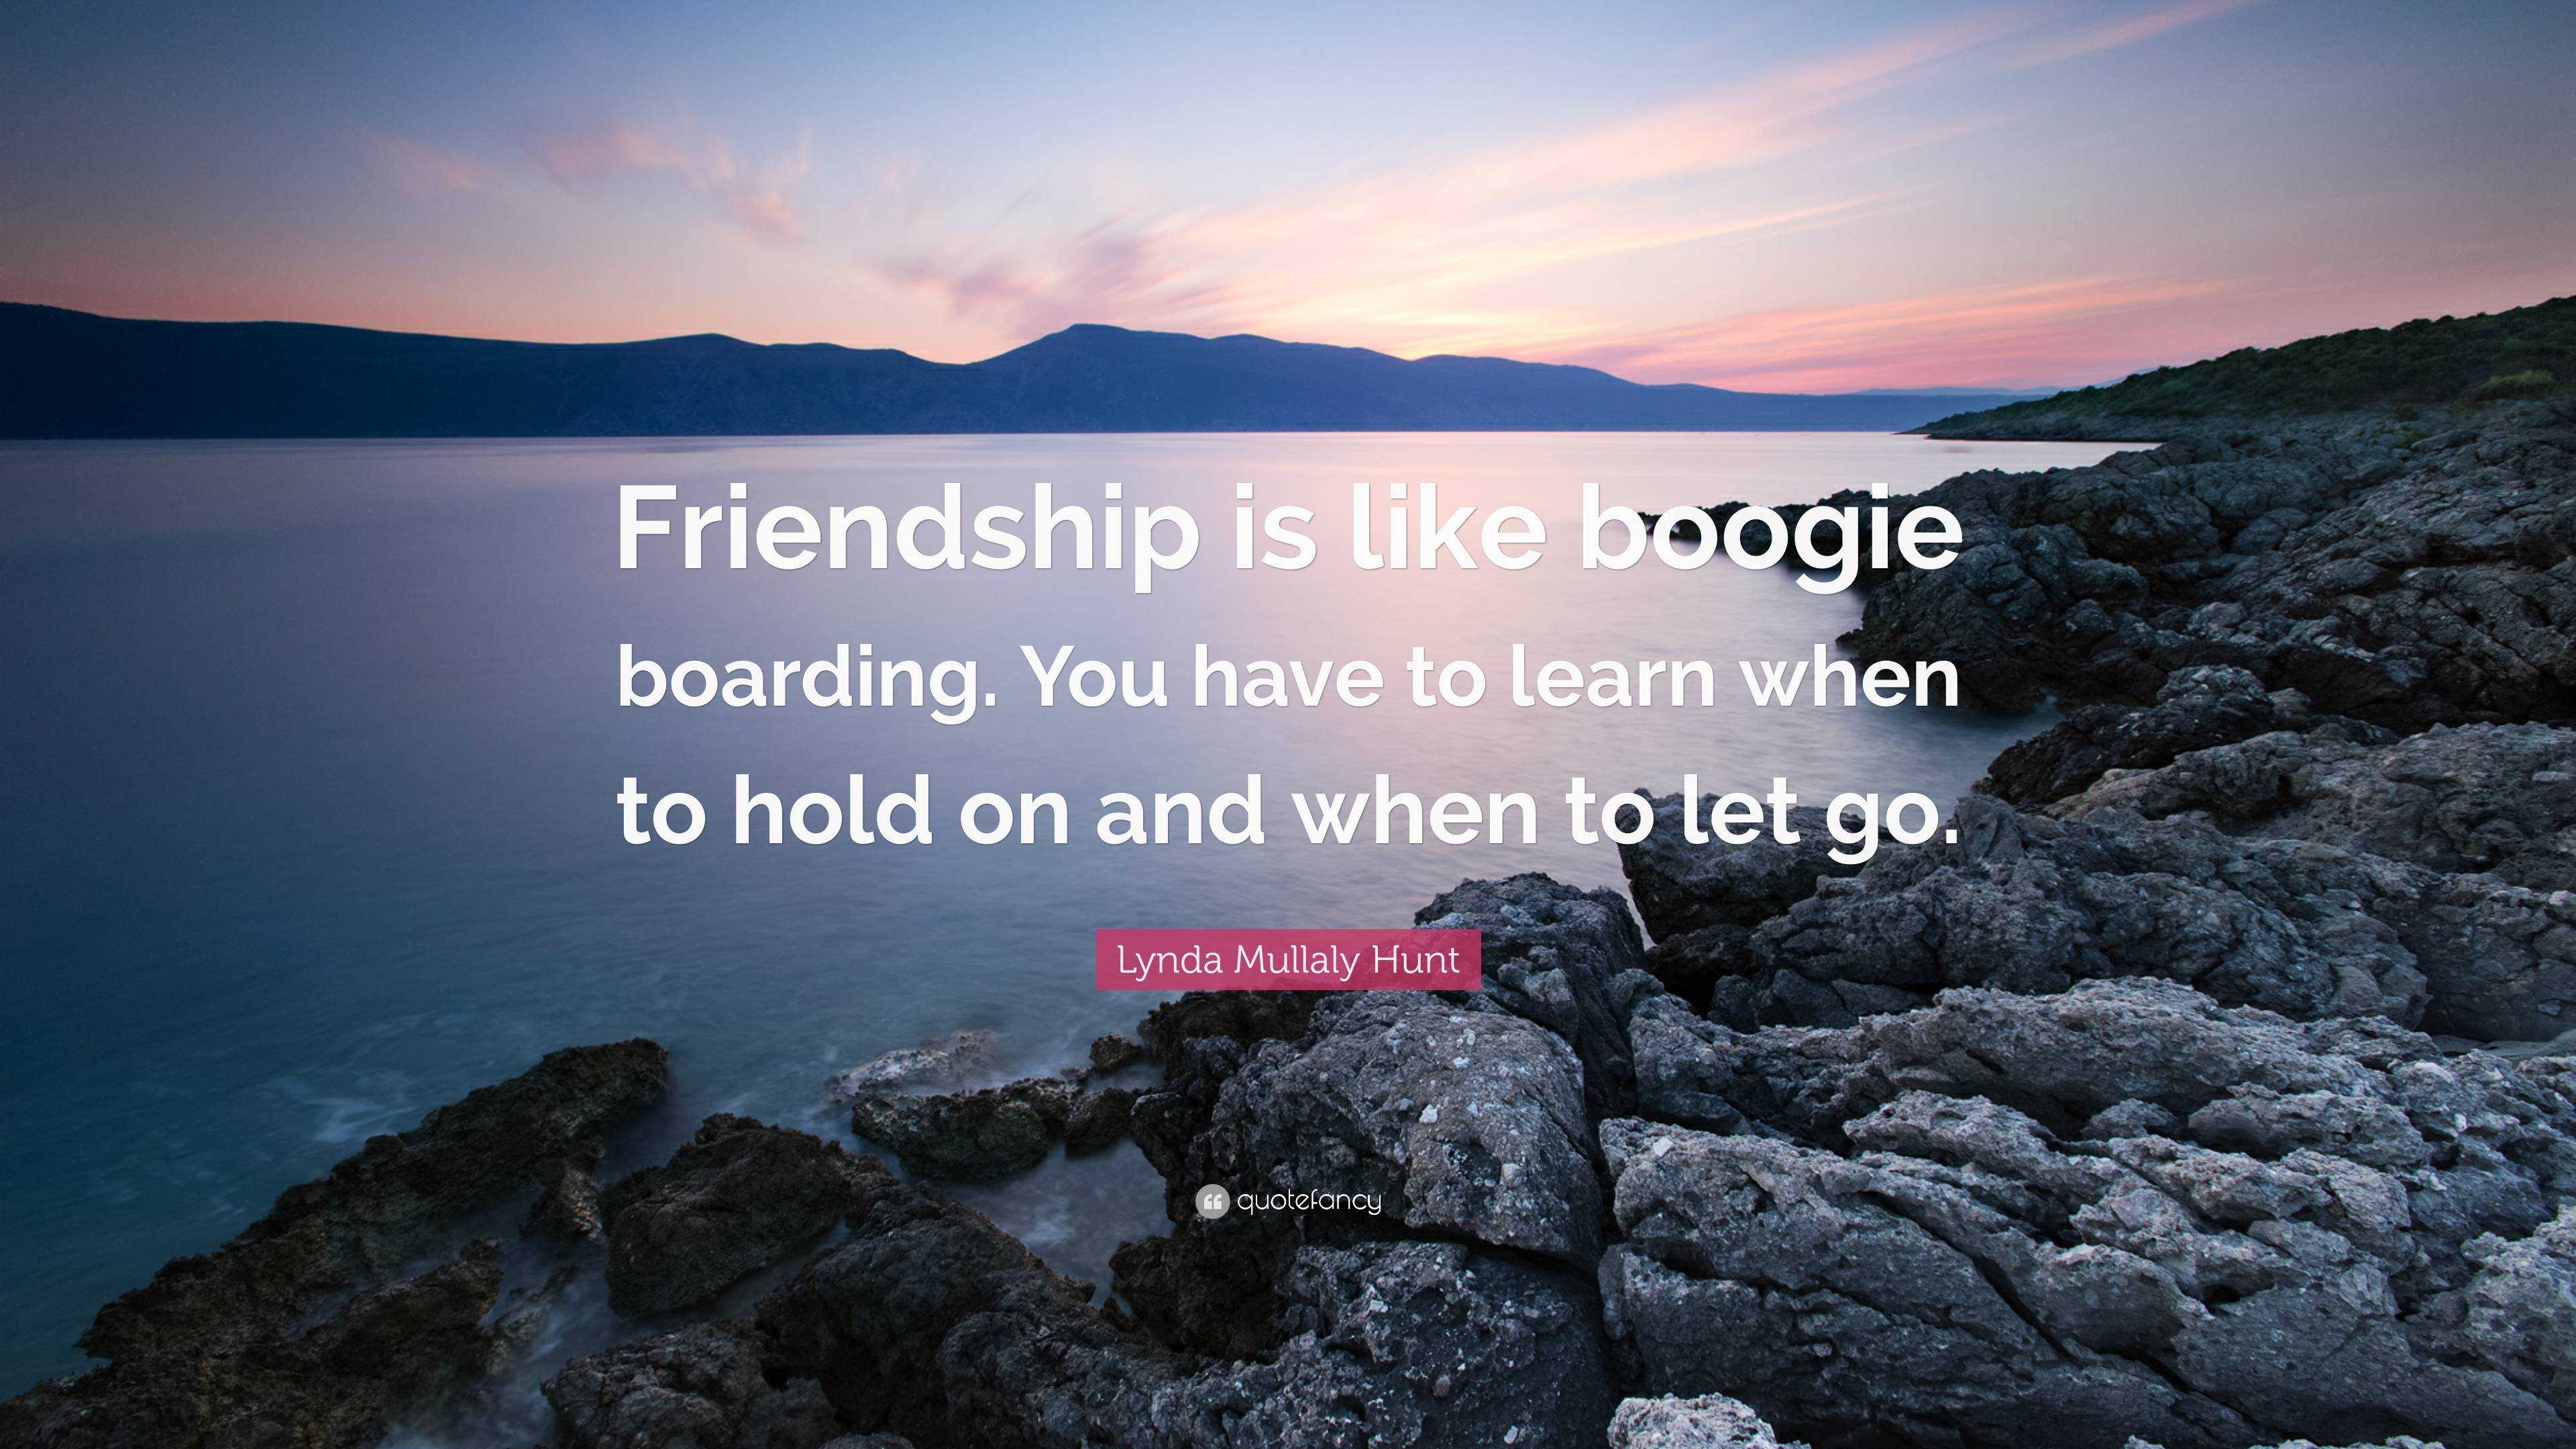 When to let go of a friendship